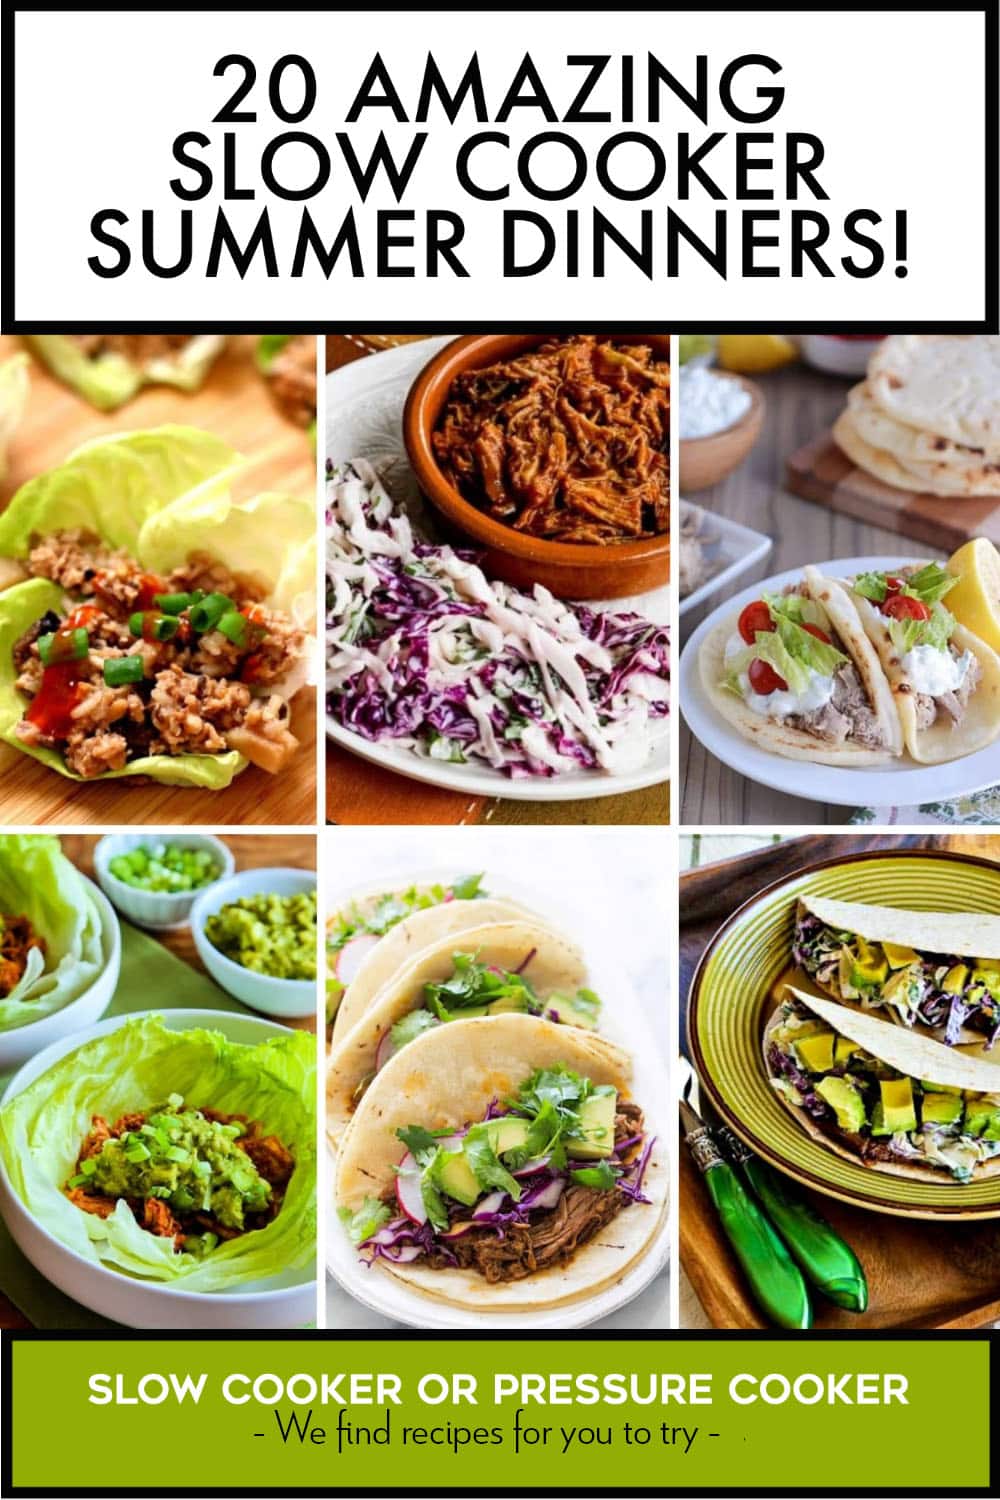 Pinterest image of 20 Amazing Slow Cooker Summer Dinners!